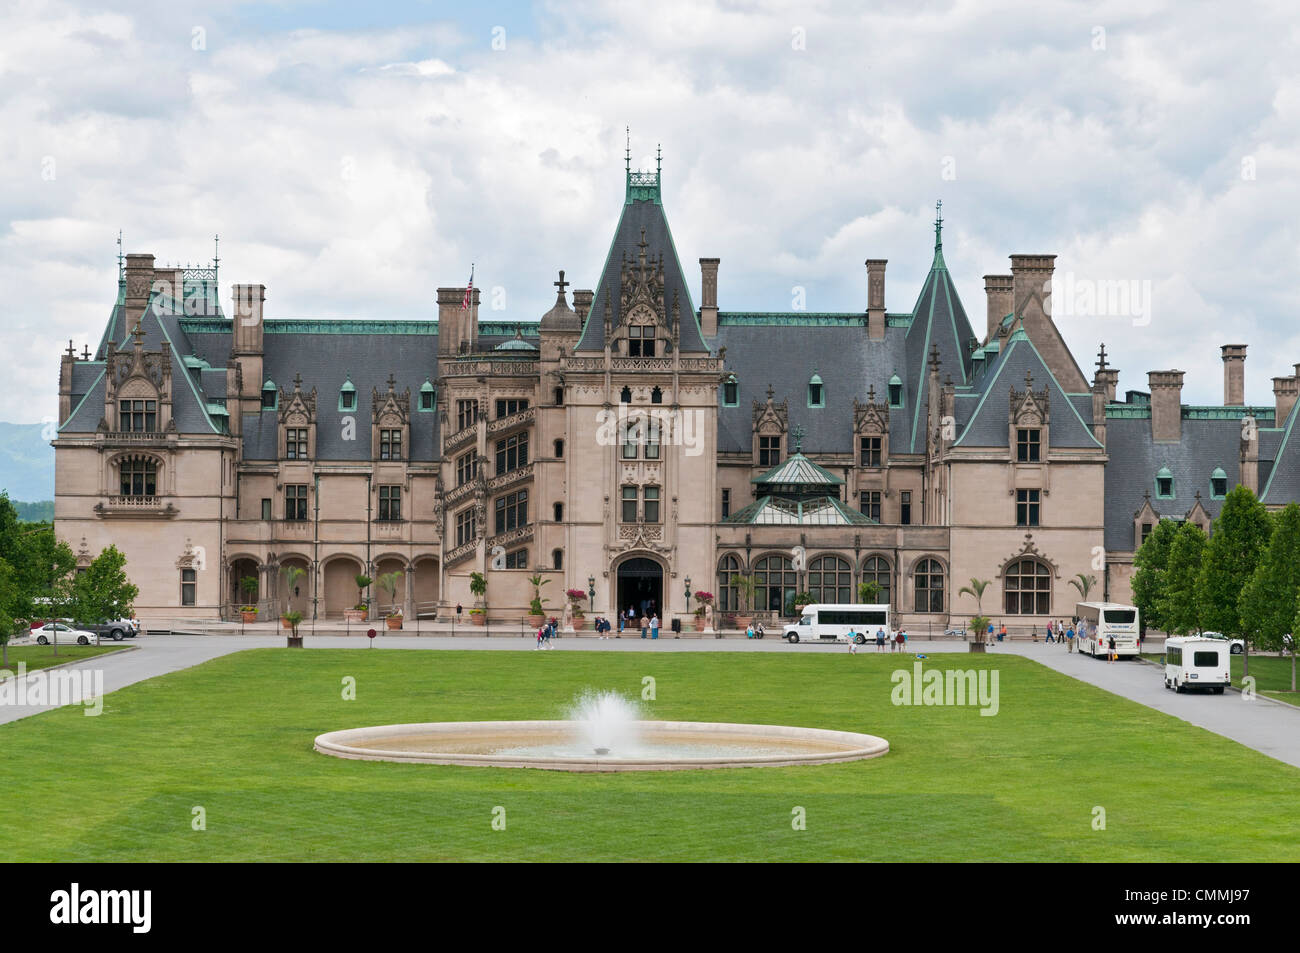 North Carolina, Asheville, Biltmore House, George W. Vanderbilt's 250-room French chateau completed in 1895. Stock Photo